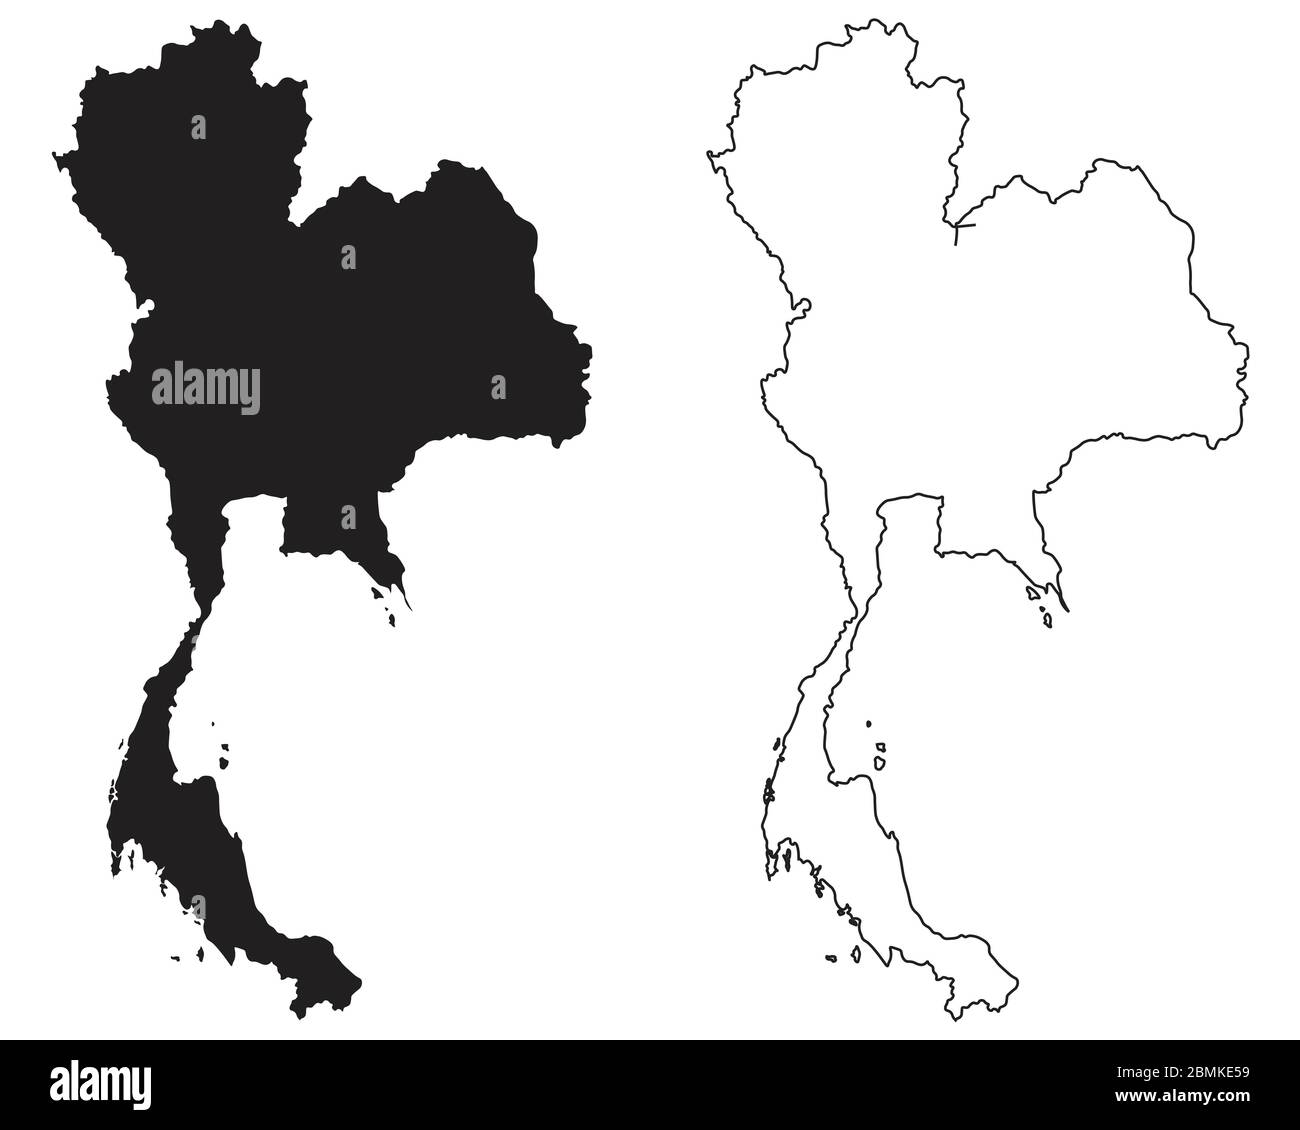 Thailand Country Map. Black silhouette and outline isolated on white background. EPS Vector Stock Vector